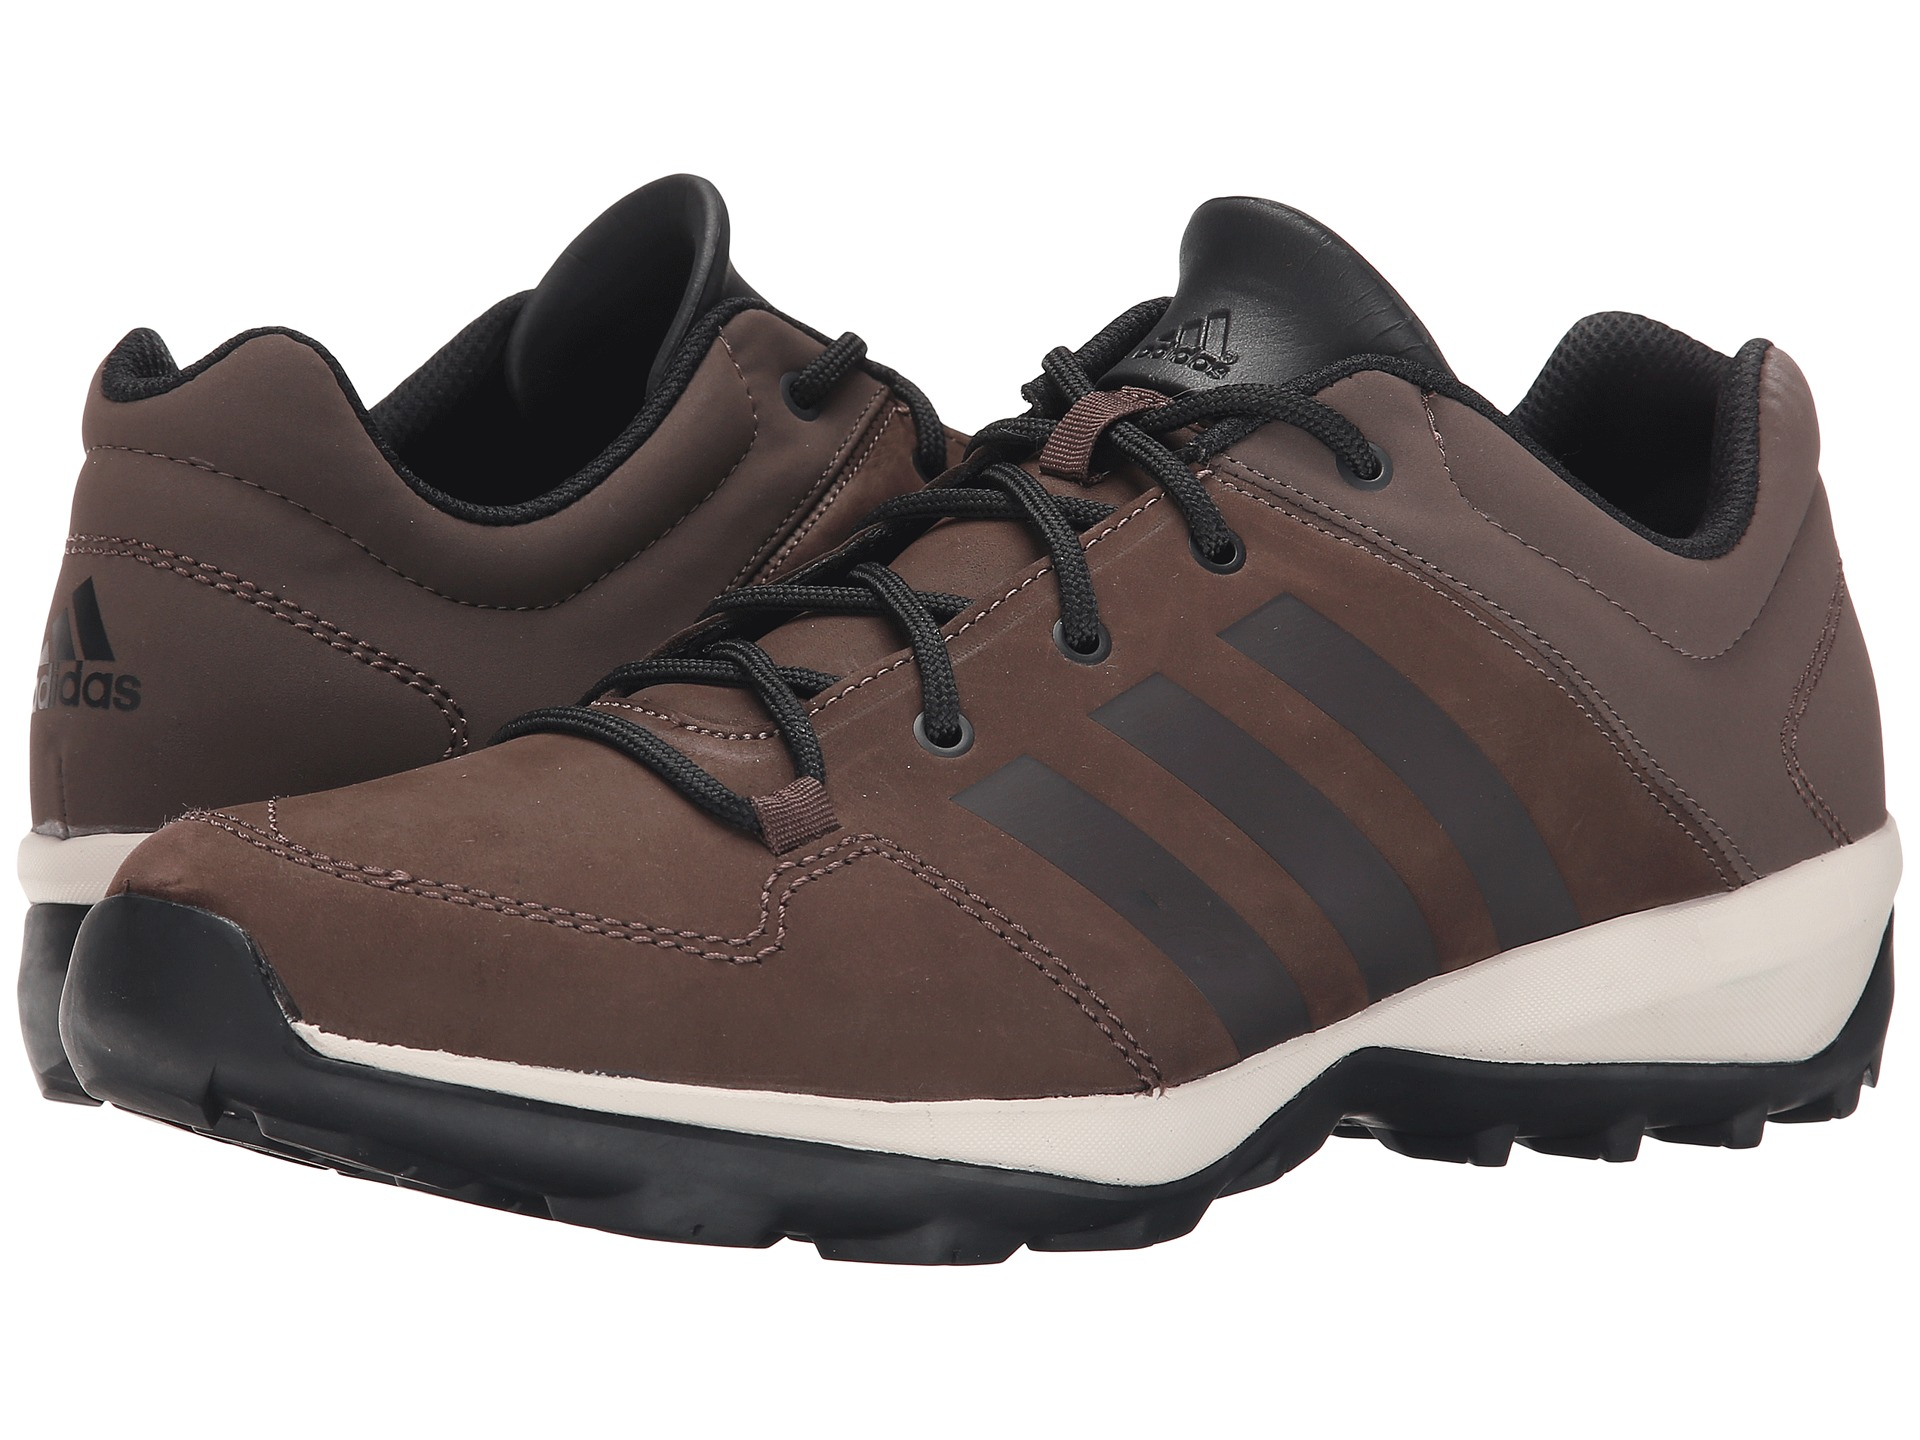 adidas Daroga Plus Leather in Brown for Men - Lyst